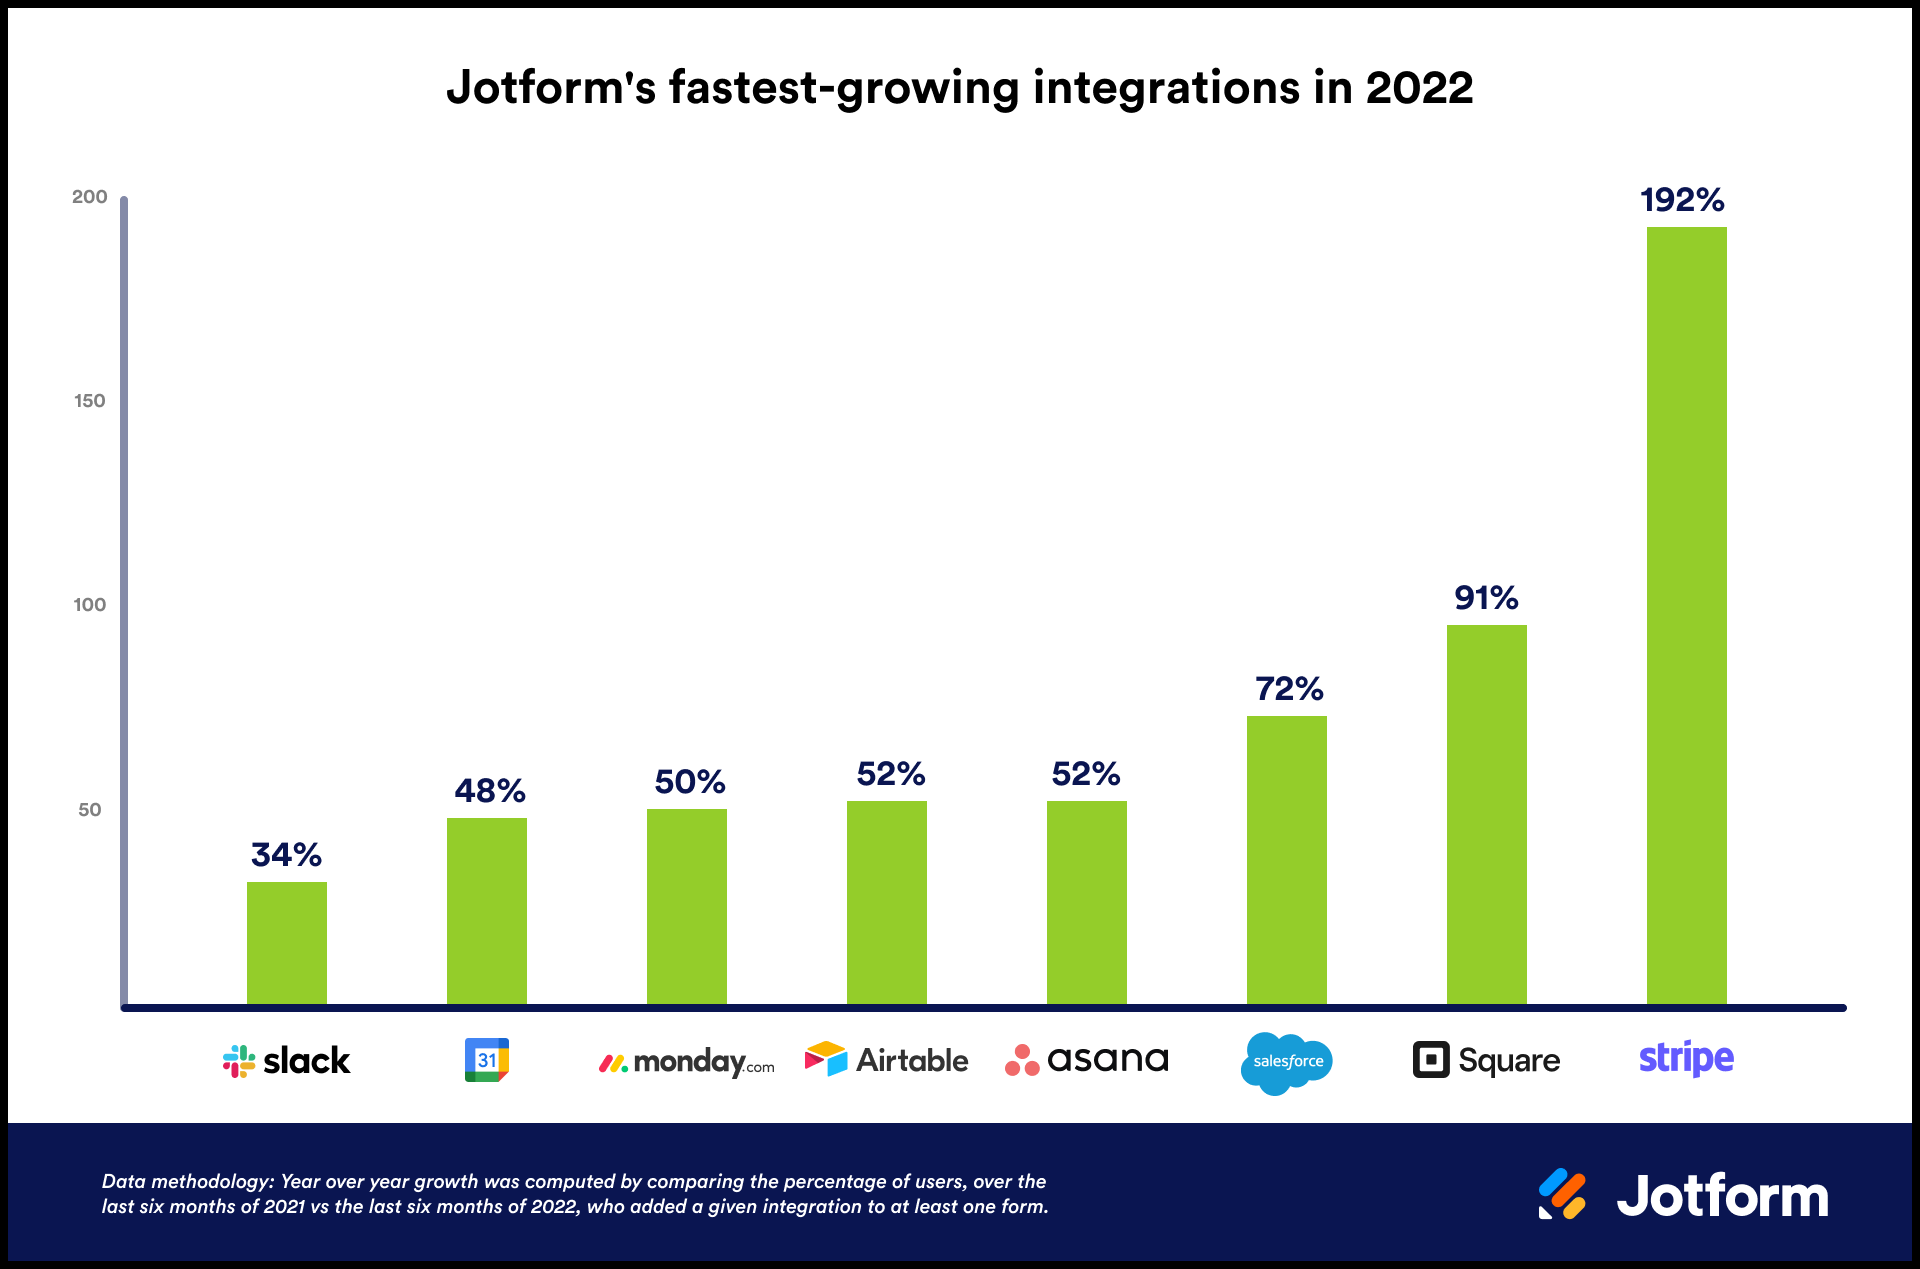 Start the year off right with Jotform’s fastest-growing integrations